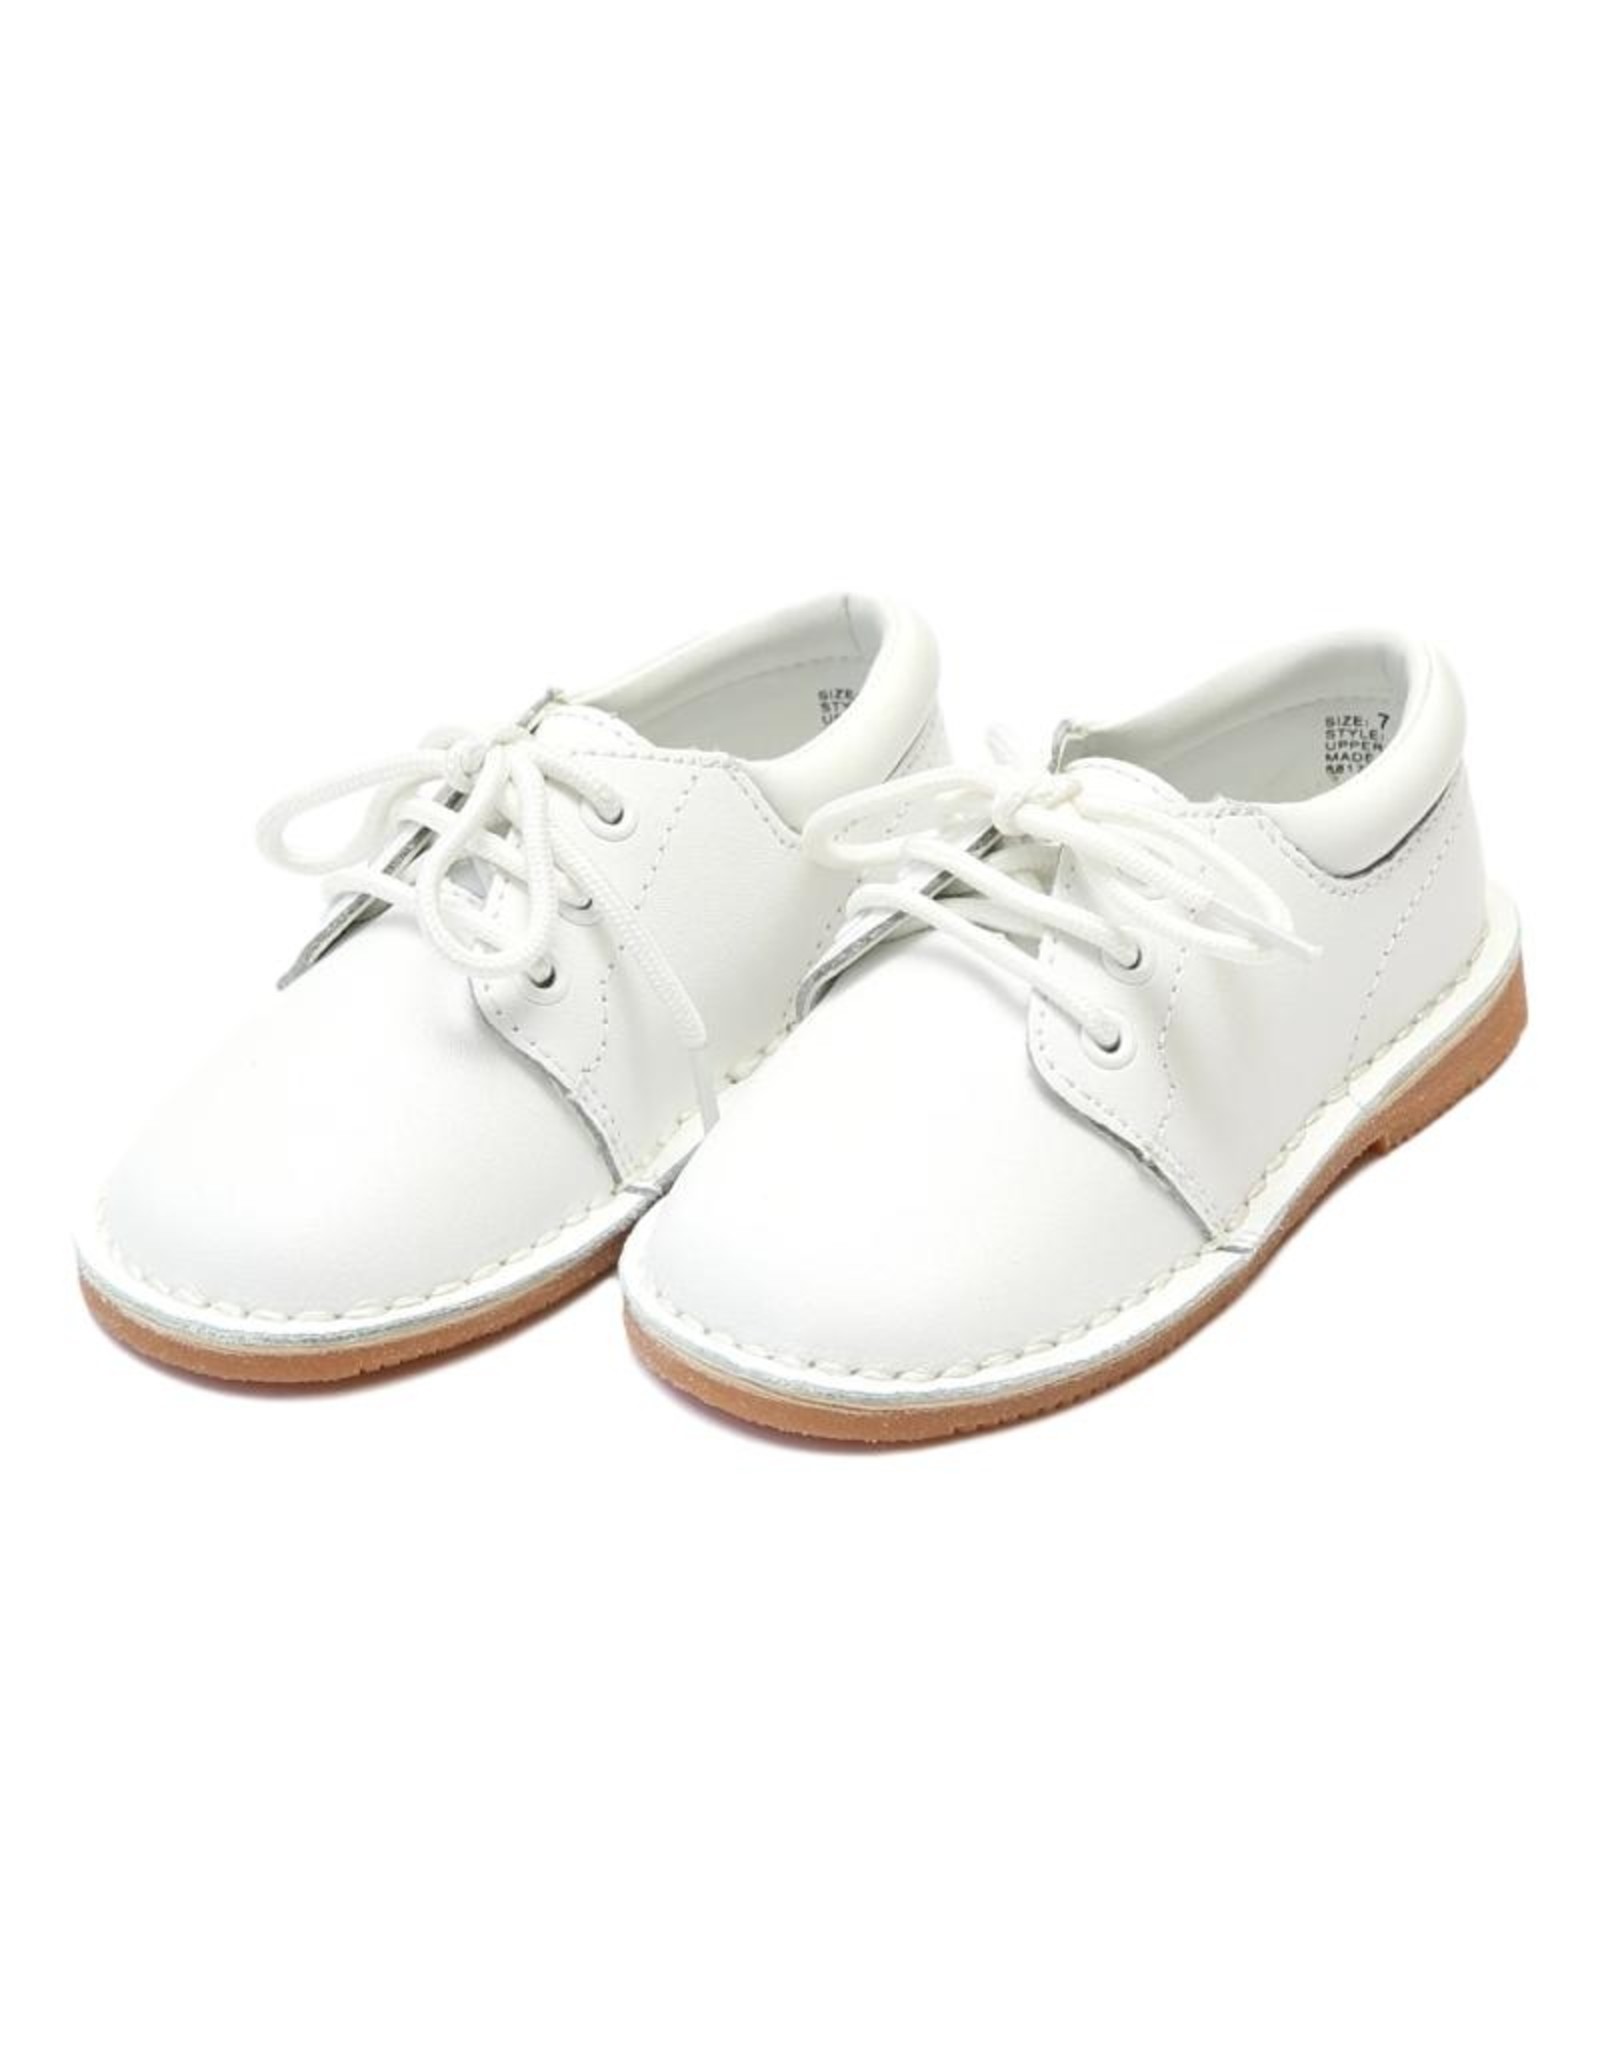 L'Amour Tyler 5012 Lace Up Shoe white